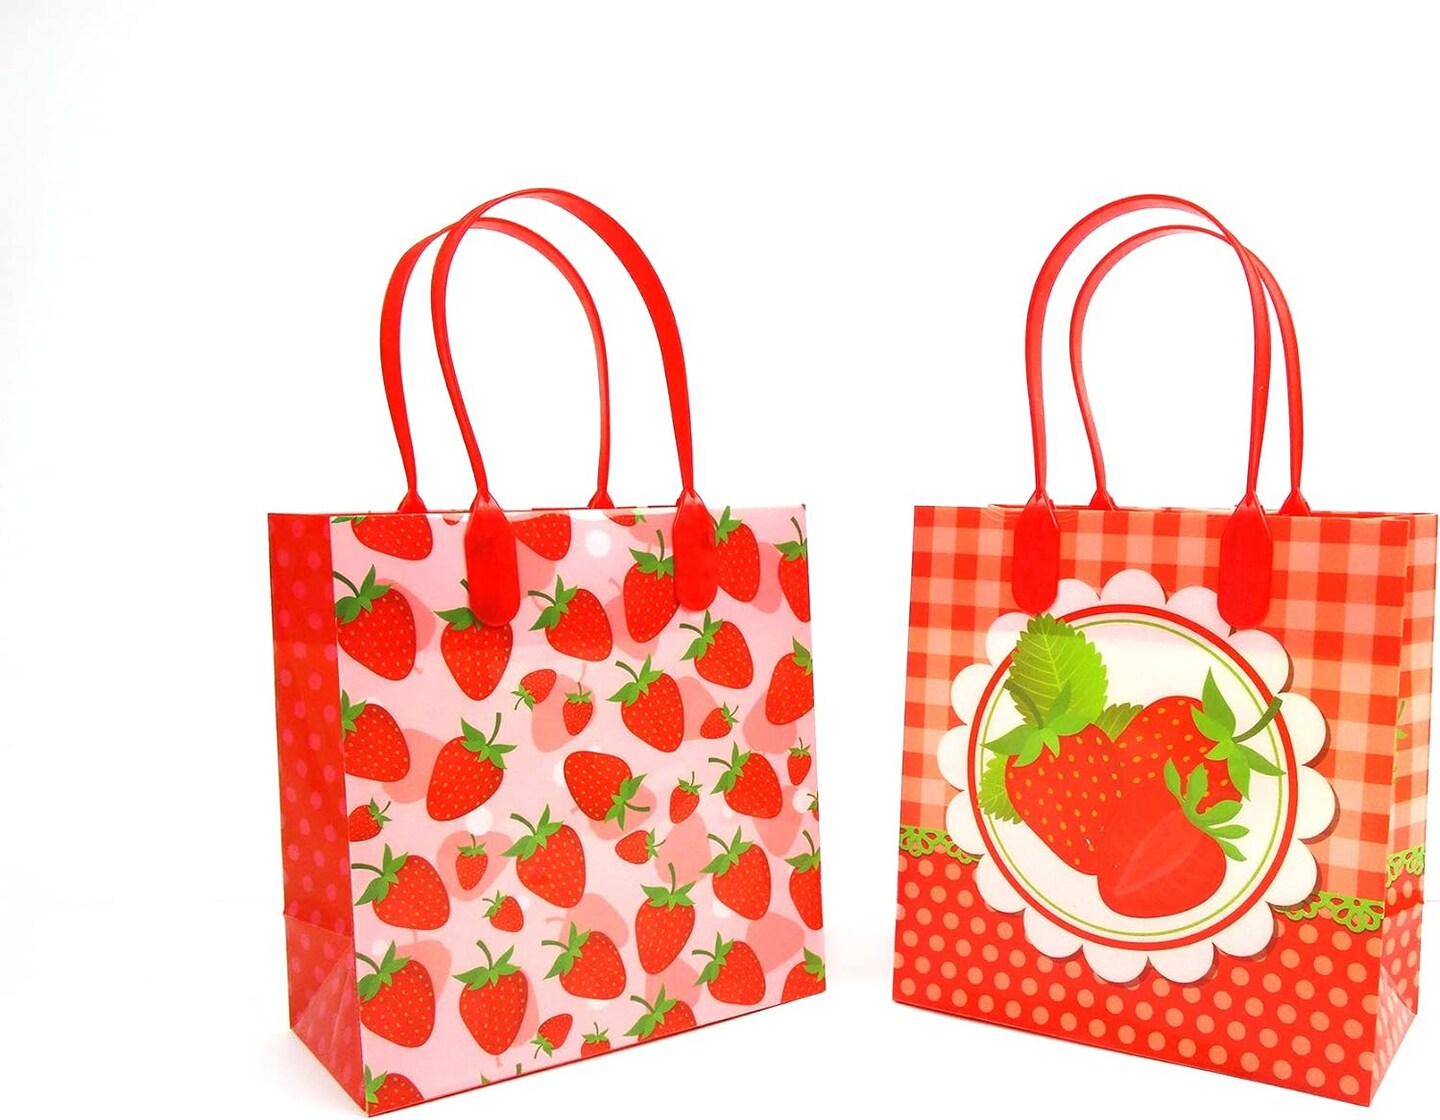 Tiny Mills Strawberry Party Favor Bags Treat Bags with Handles Candy Bags for Birthday Party ,12 Pack